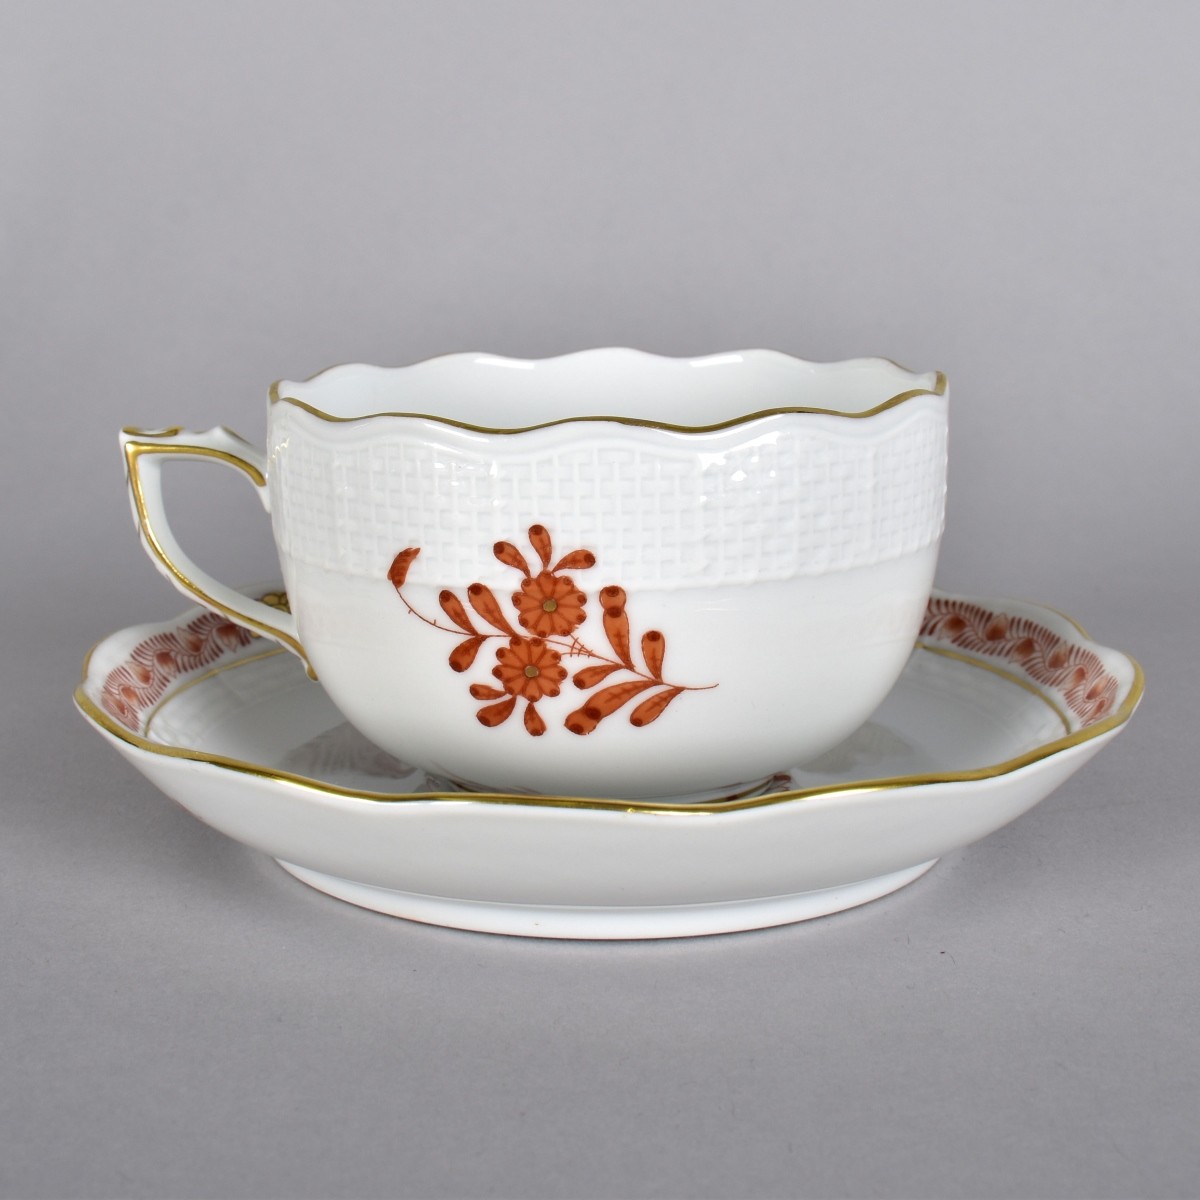 Herend Chinese Bouquet Dinner Service